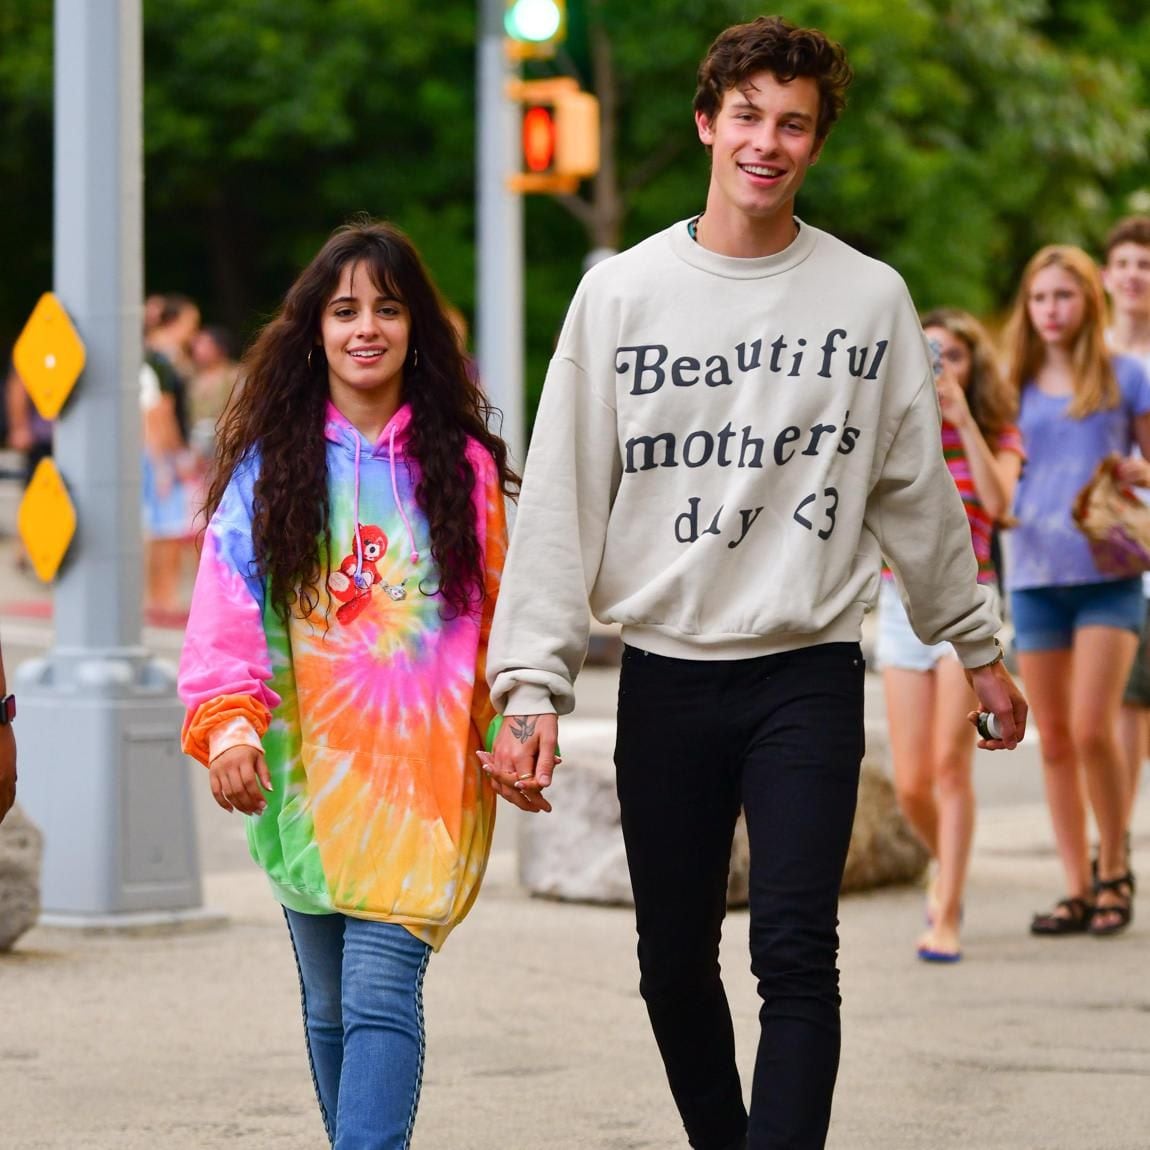 Camila Cabello and Shawn Mendes in New York